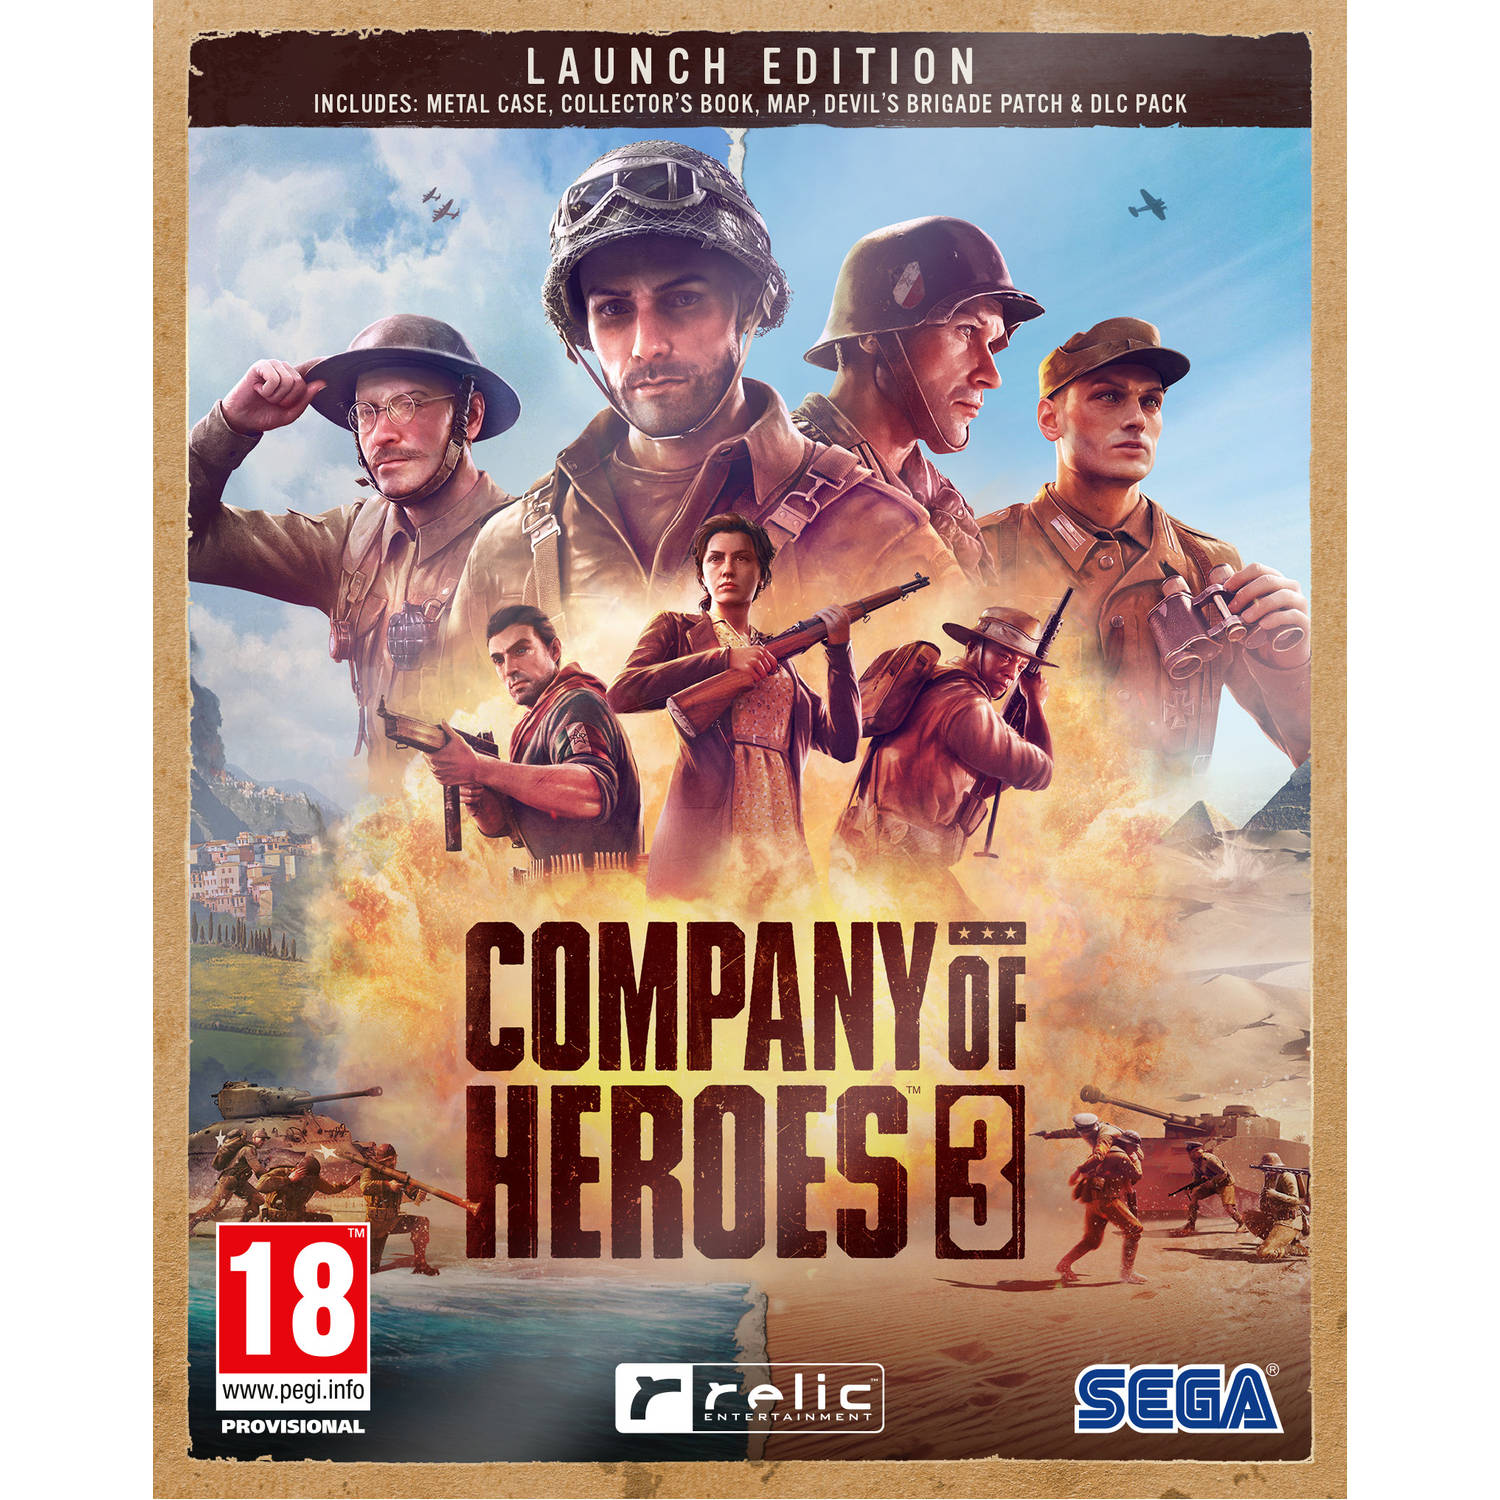 Company of Heroes 3 Metalcase Launch Edition PC